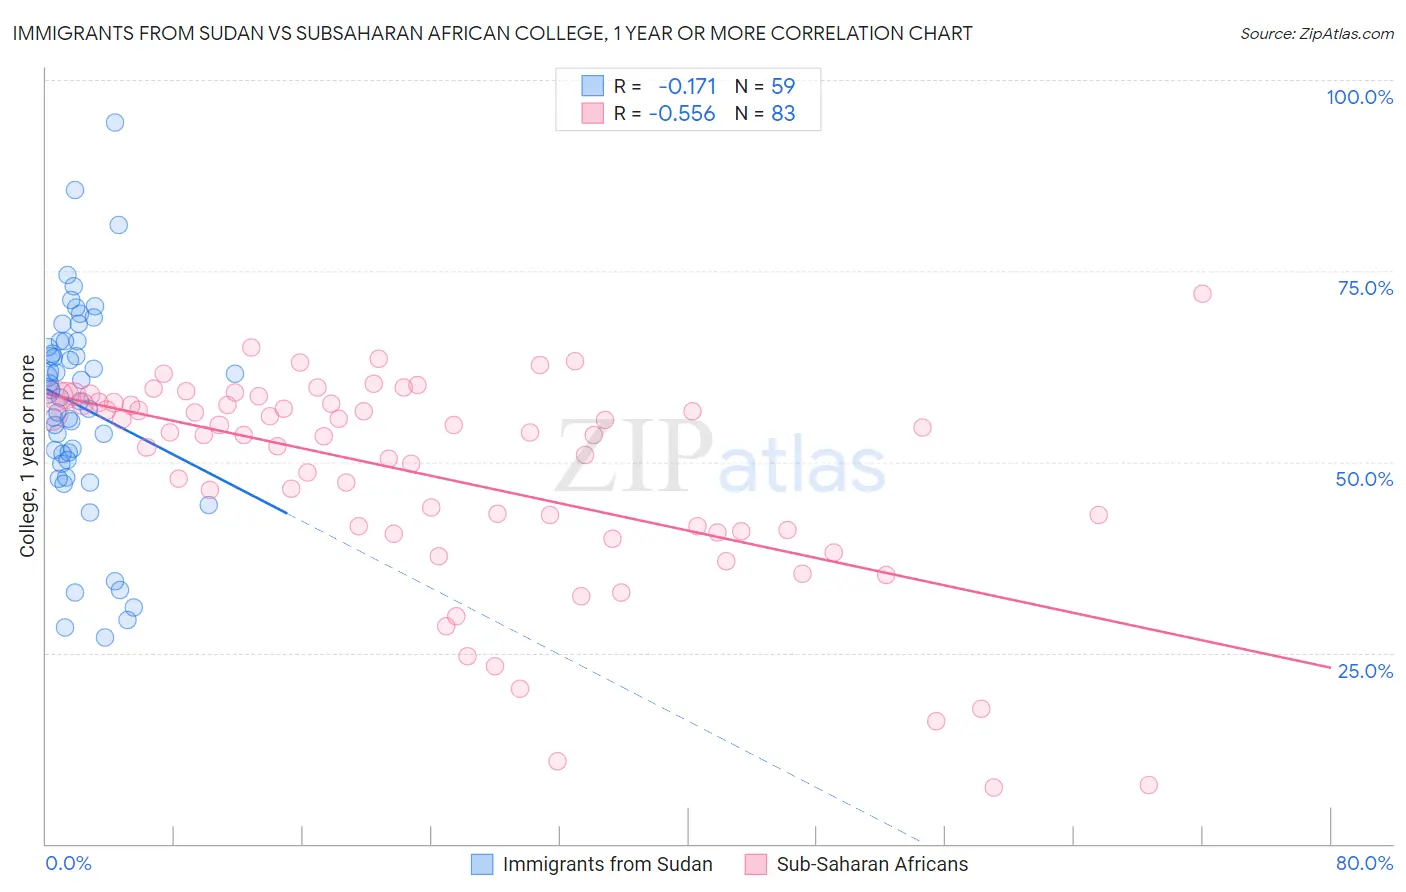 Immigrants from Sudan vs Subsaharan African College, 1 year or more